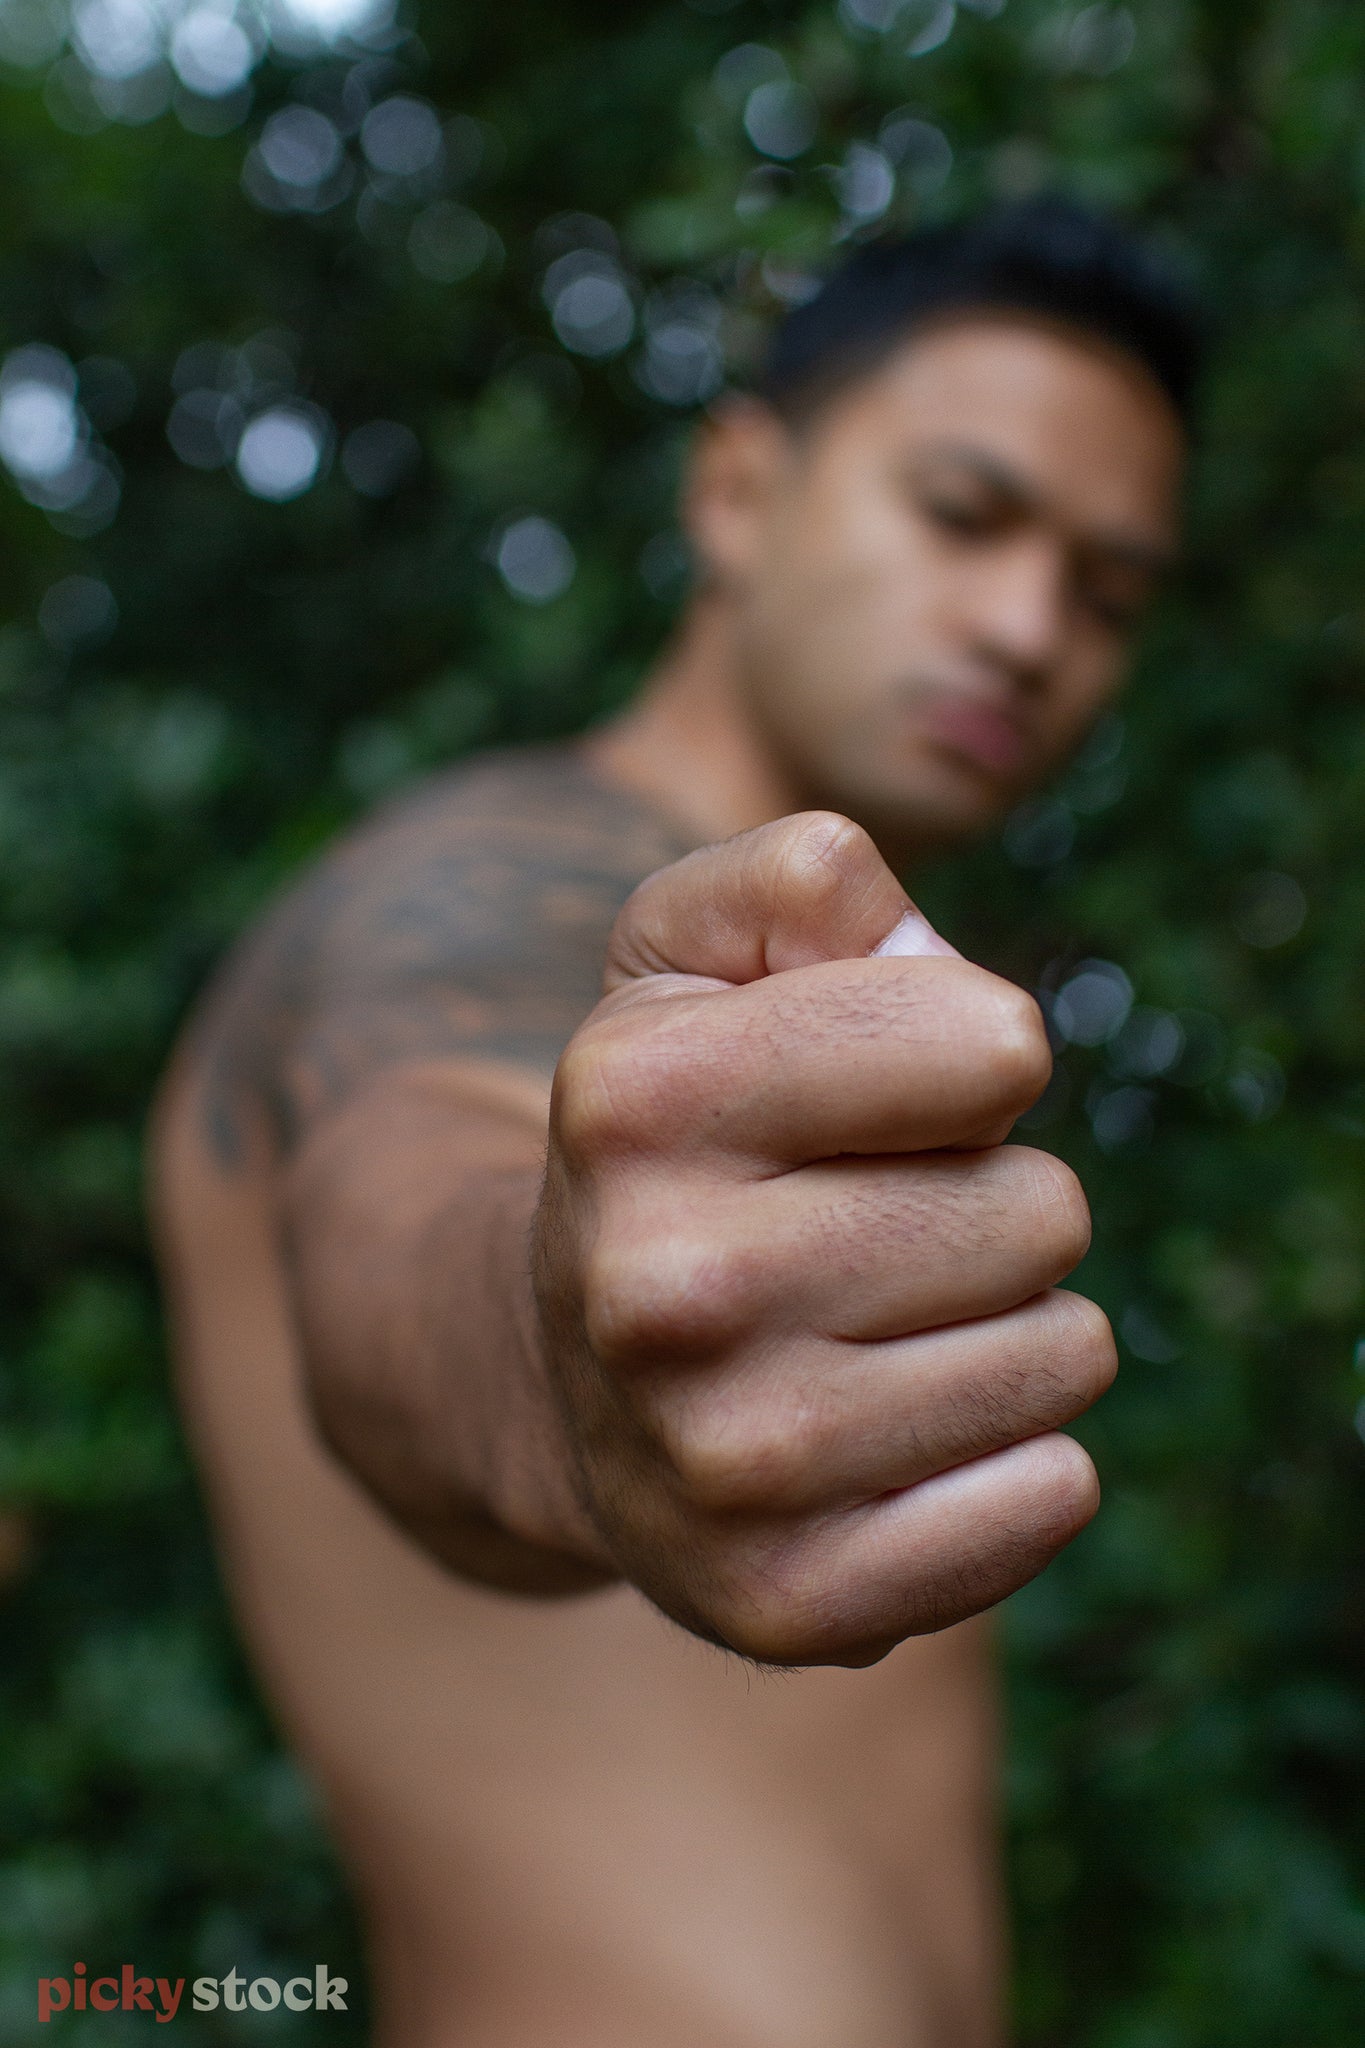 Polynesian man holds his fist out to camera. Fist in focus, everything else not in focus as we can see he is shirtless, his traditional tattoos can be seen on his upper right chest, shoulder and wrapping around his bicep. 